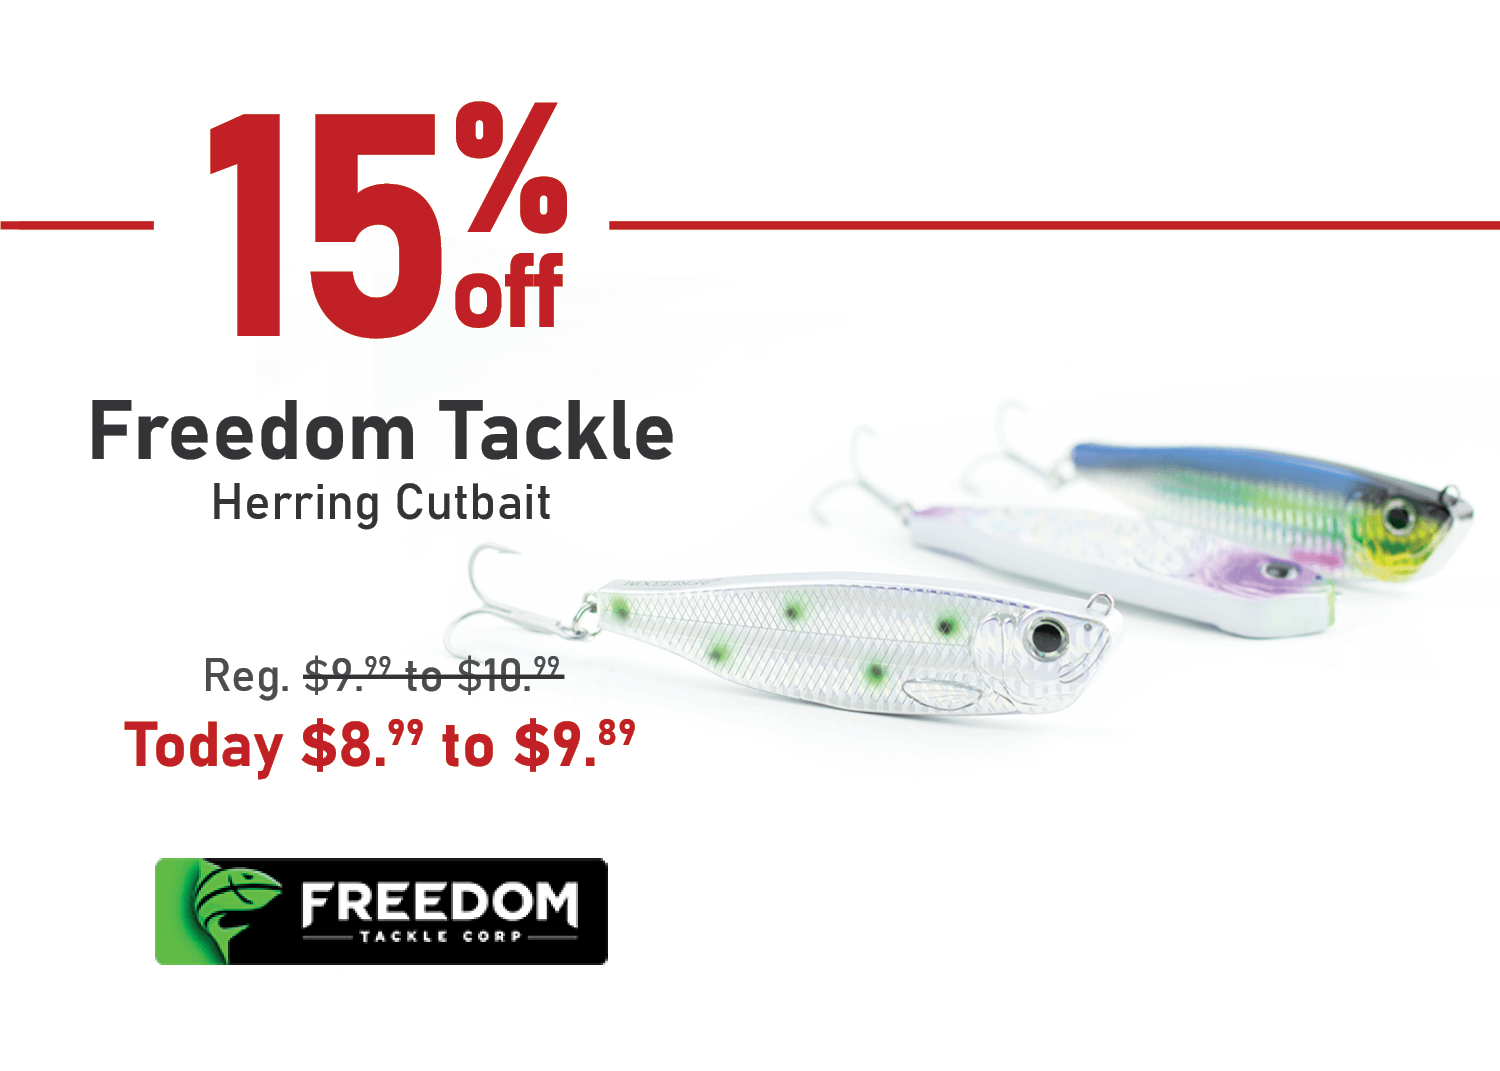 Save 15% on the Freedom Tackle Herring Cutbait